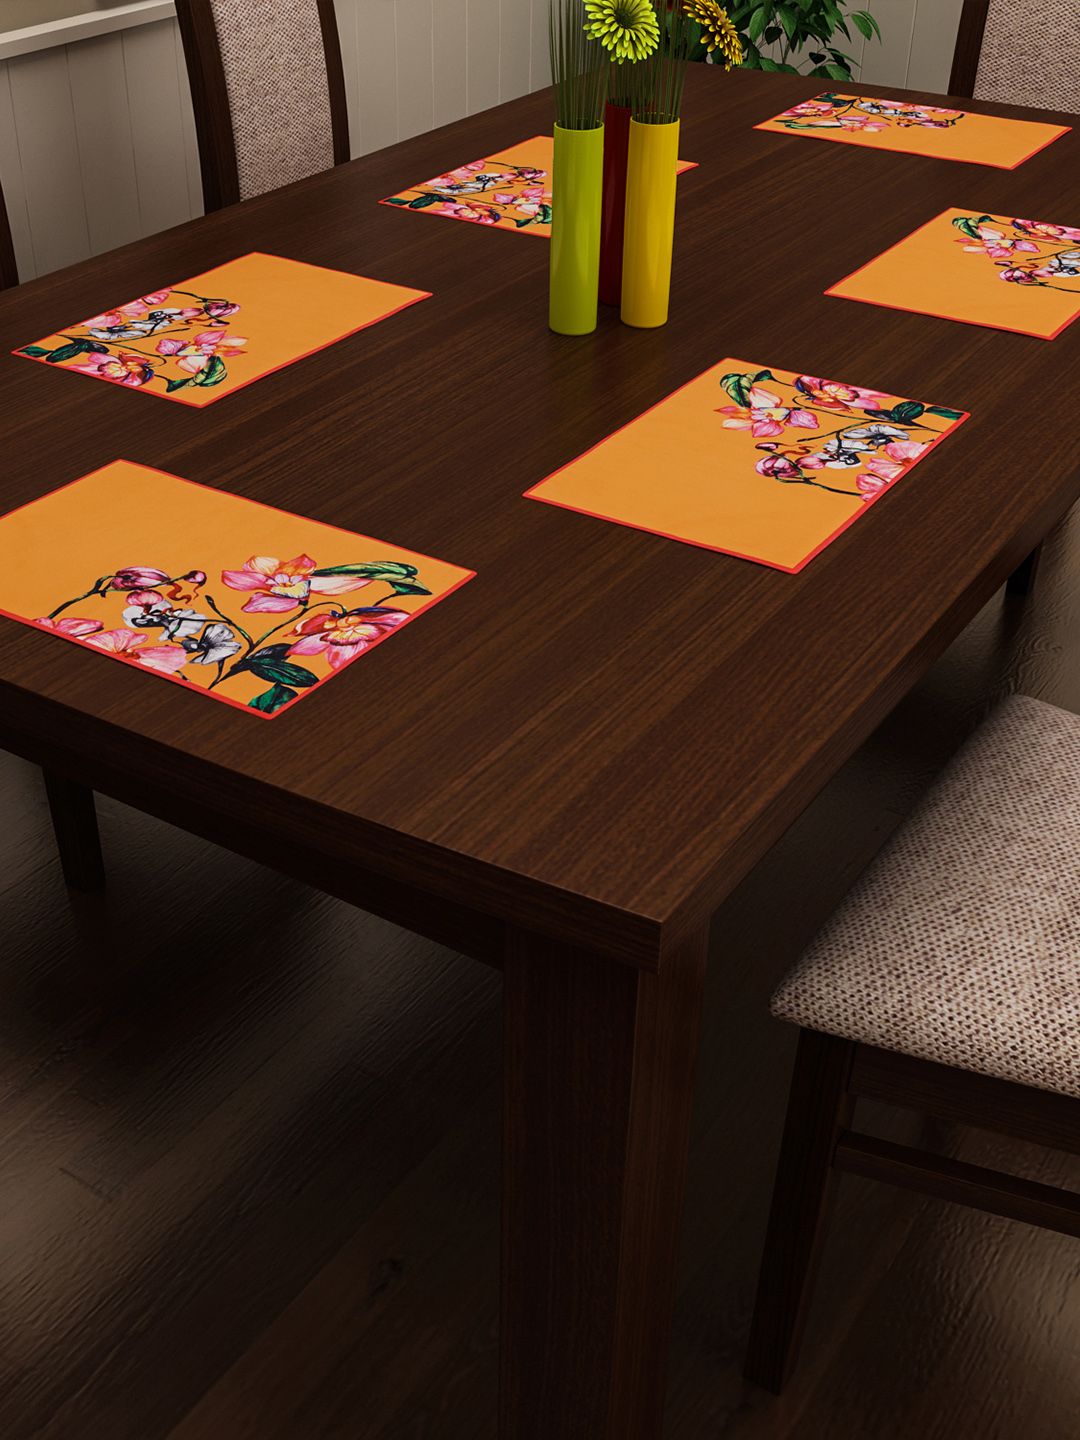 SEJ by Nisha Gupta Set of 6 Yellow & Multicoloured Printed Table Placemats Price in India